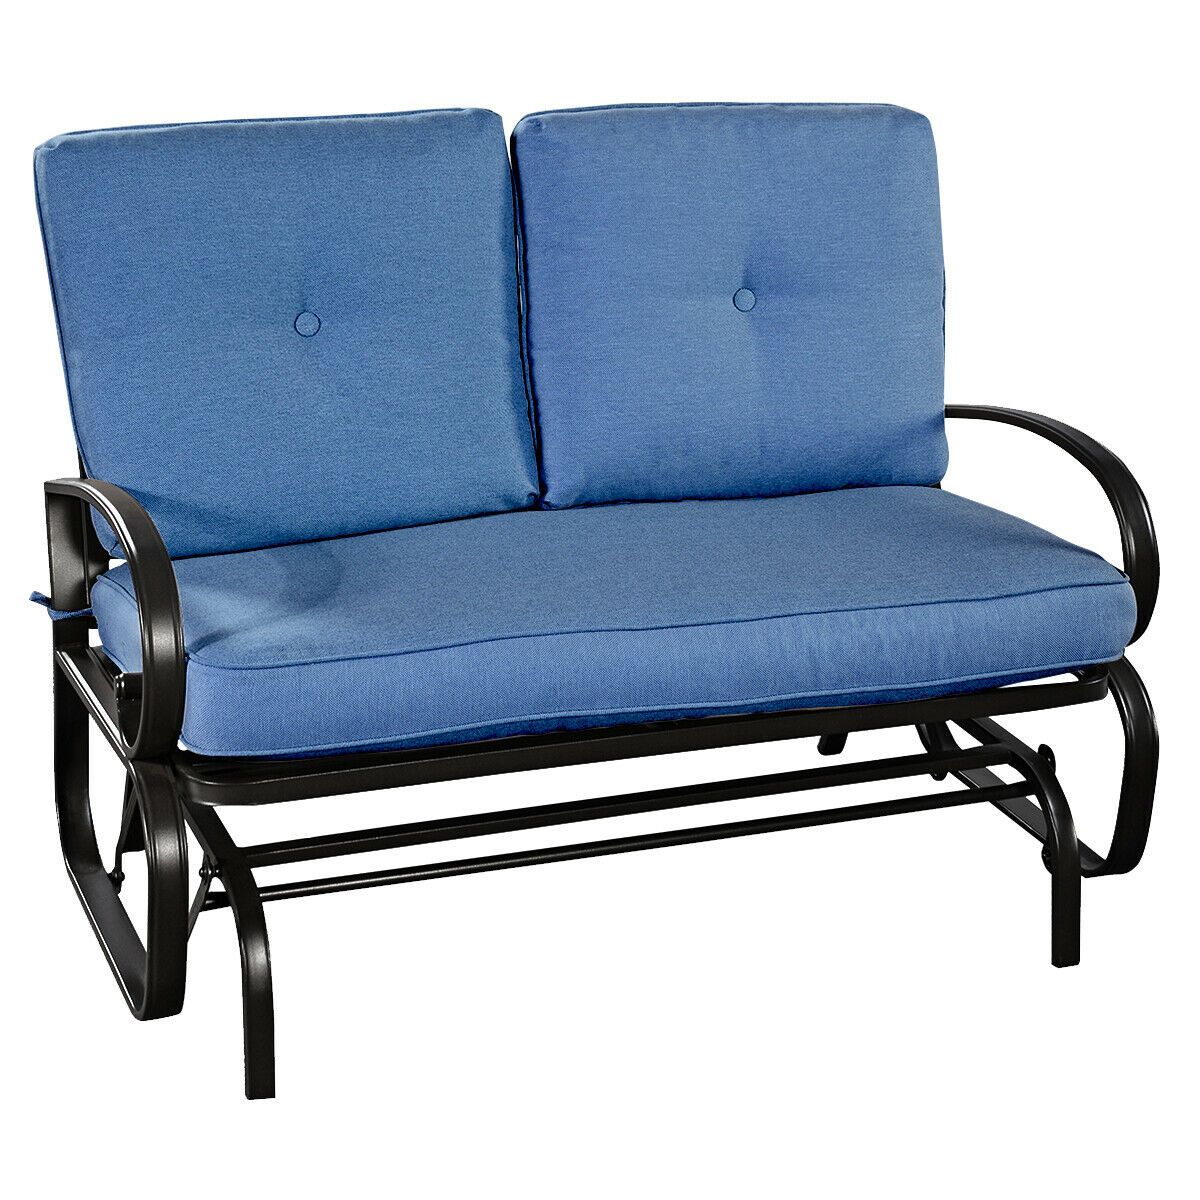 Large Spacious Outdoor Porch Glider Rocking Cushioned Bench - Westfield Retailers